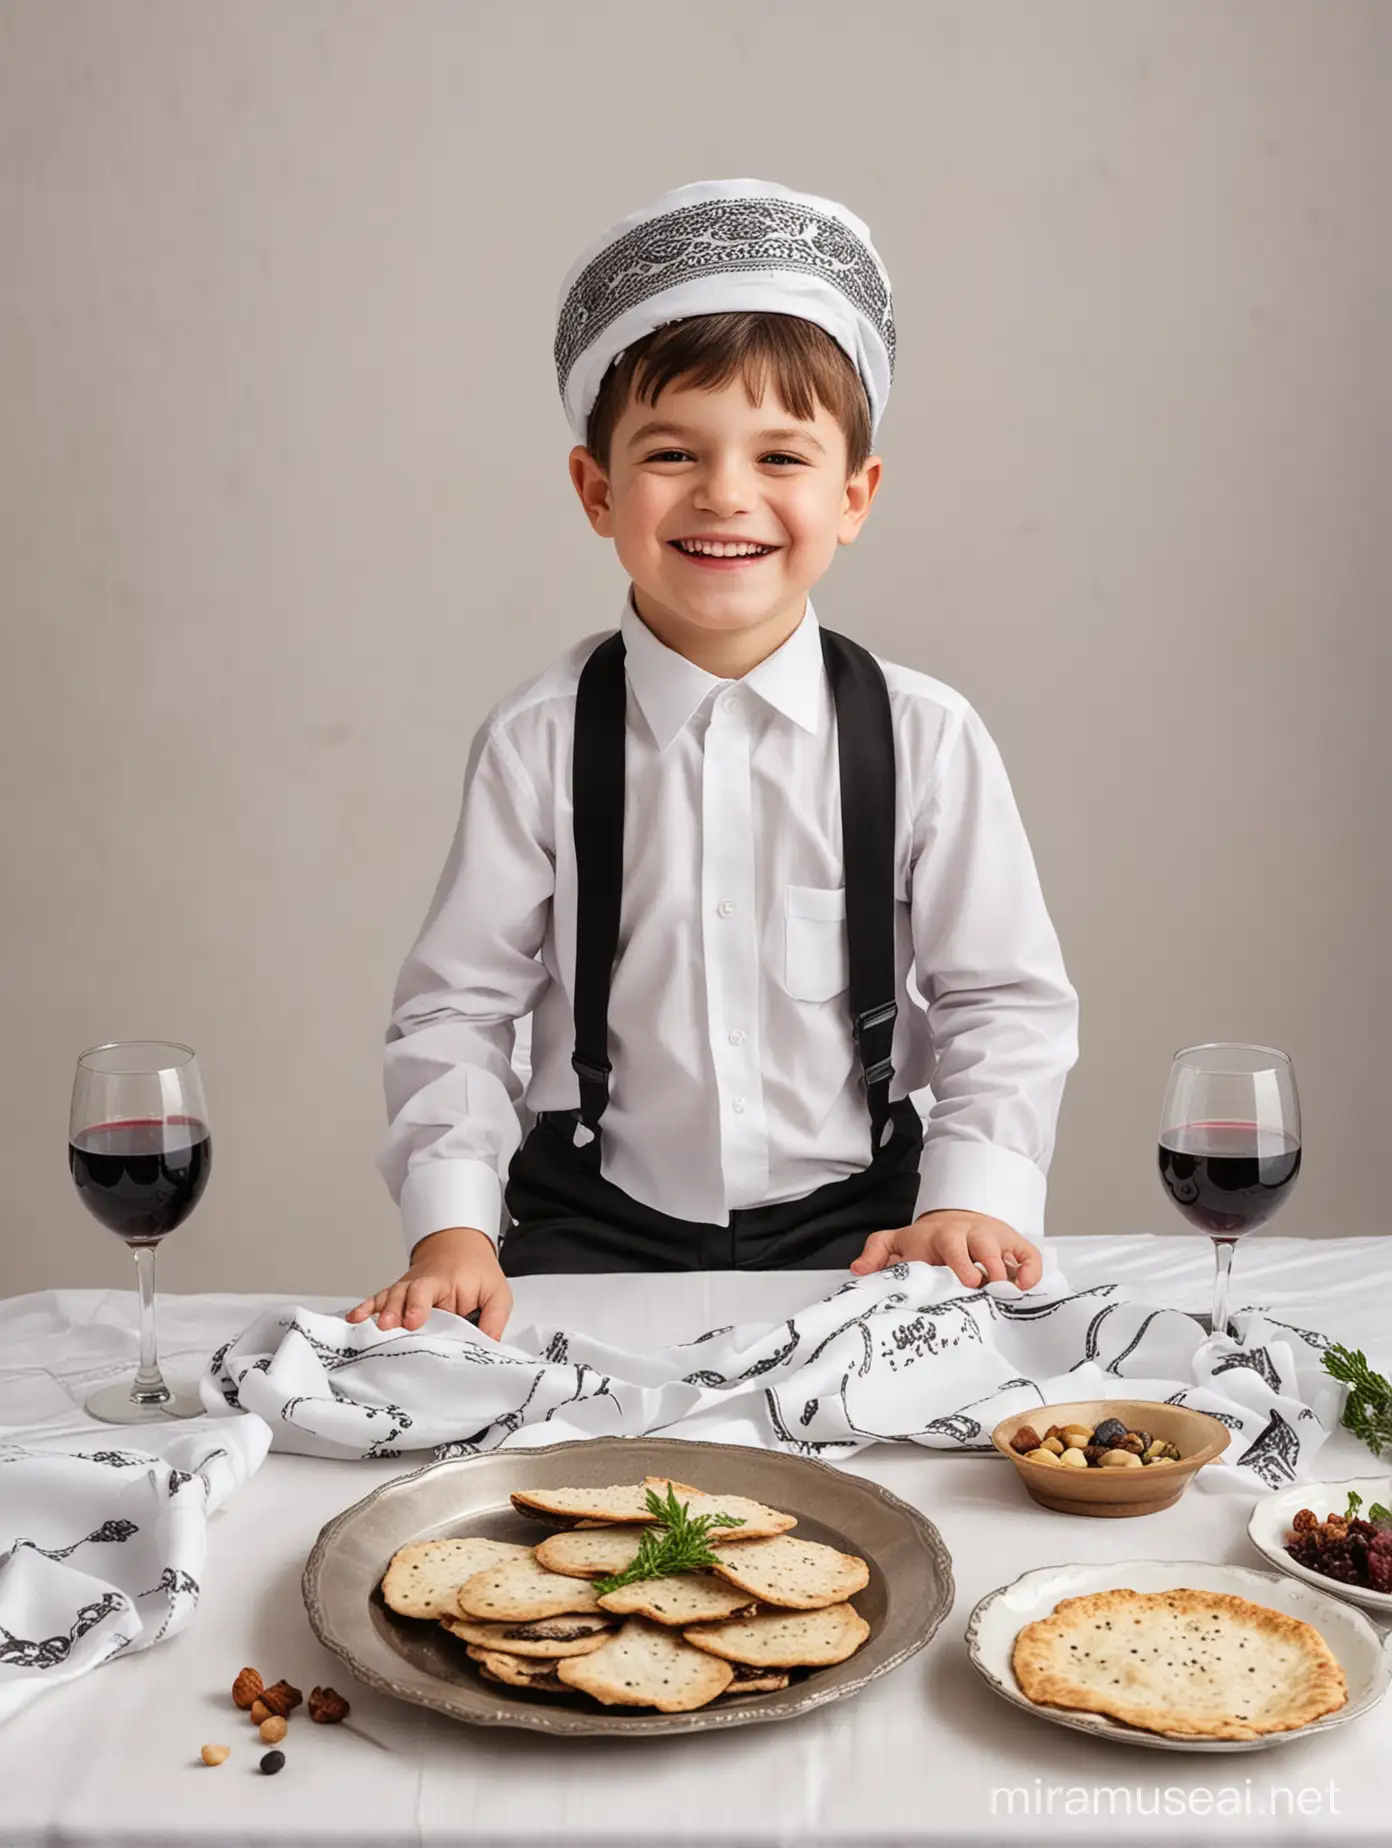 A child is sitting at a Pesach table, a kippa on his head, on the table a white tablecloth, a Seder veil, matzots, wine and glasses of wine, the child is happy with his hands on his sides and a big smile, because he found an afikoman in the Pesach order